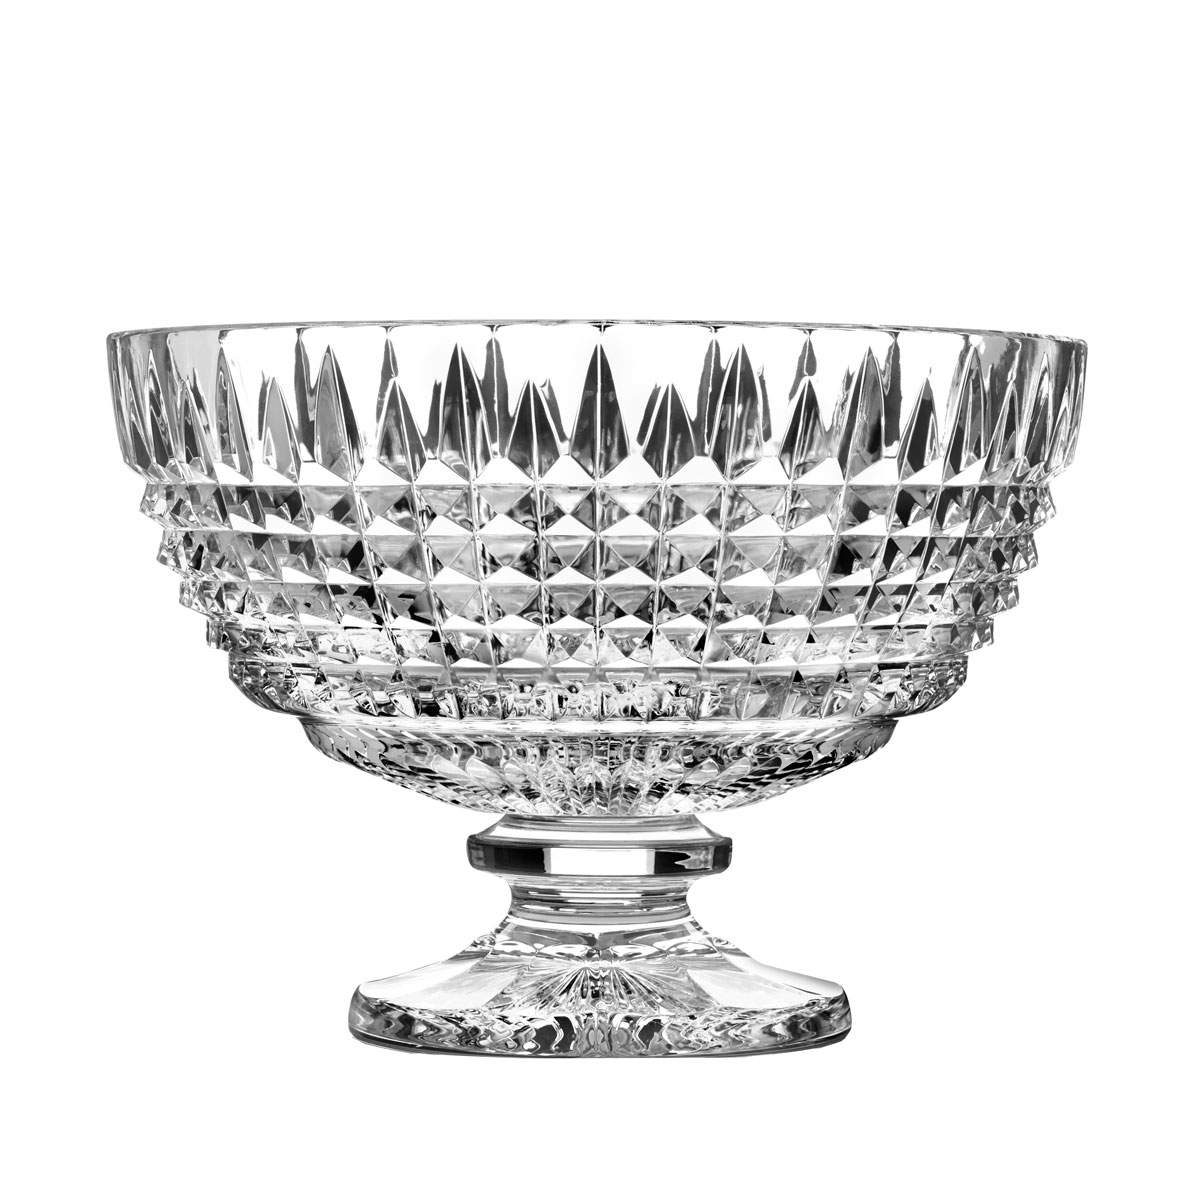 Waterford Crystal, House of Waterford Lismore Diamond Footed Crystal Centerpiece